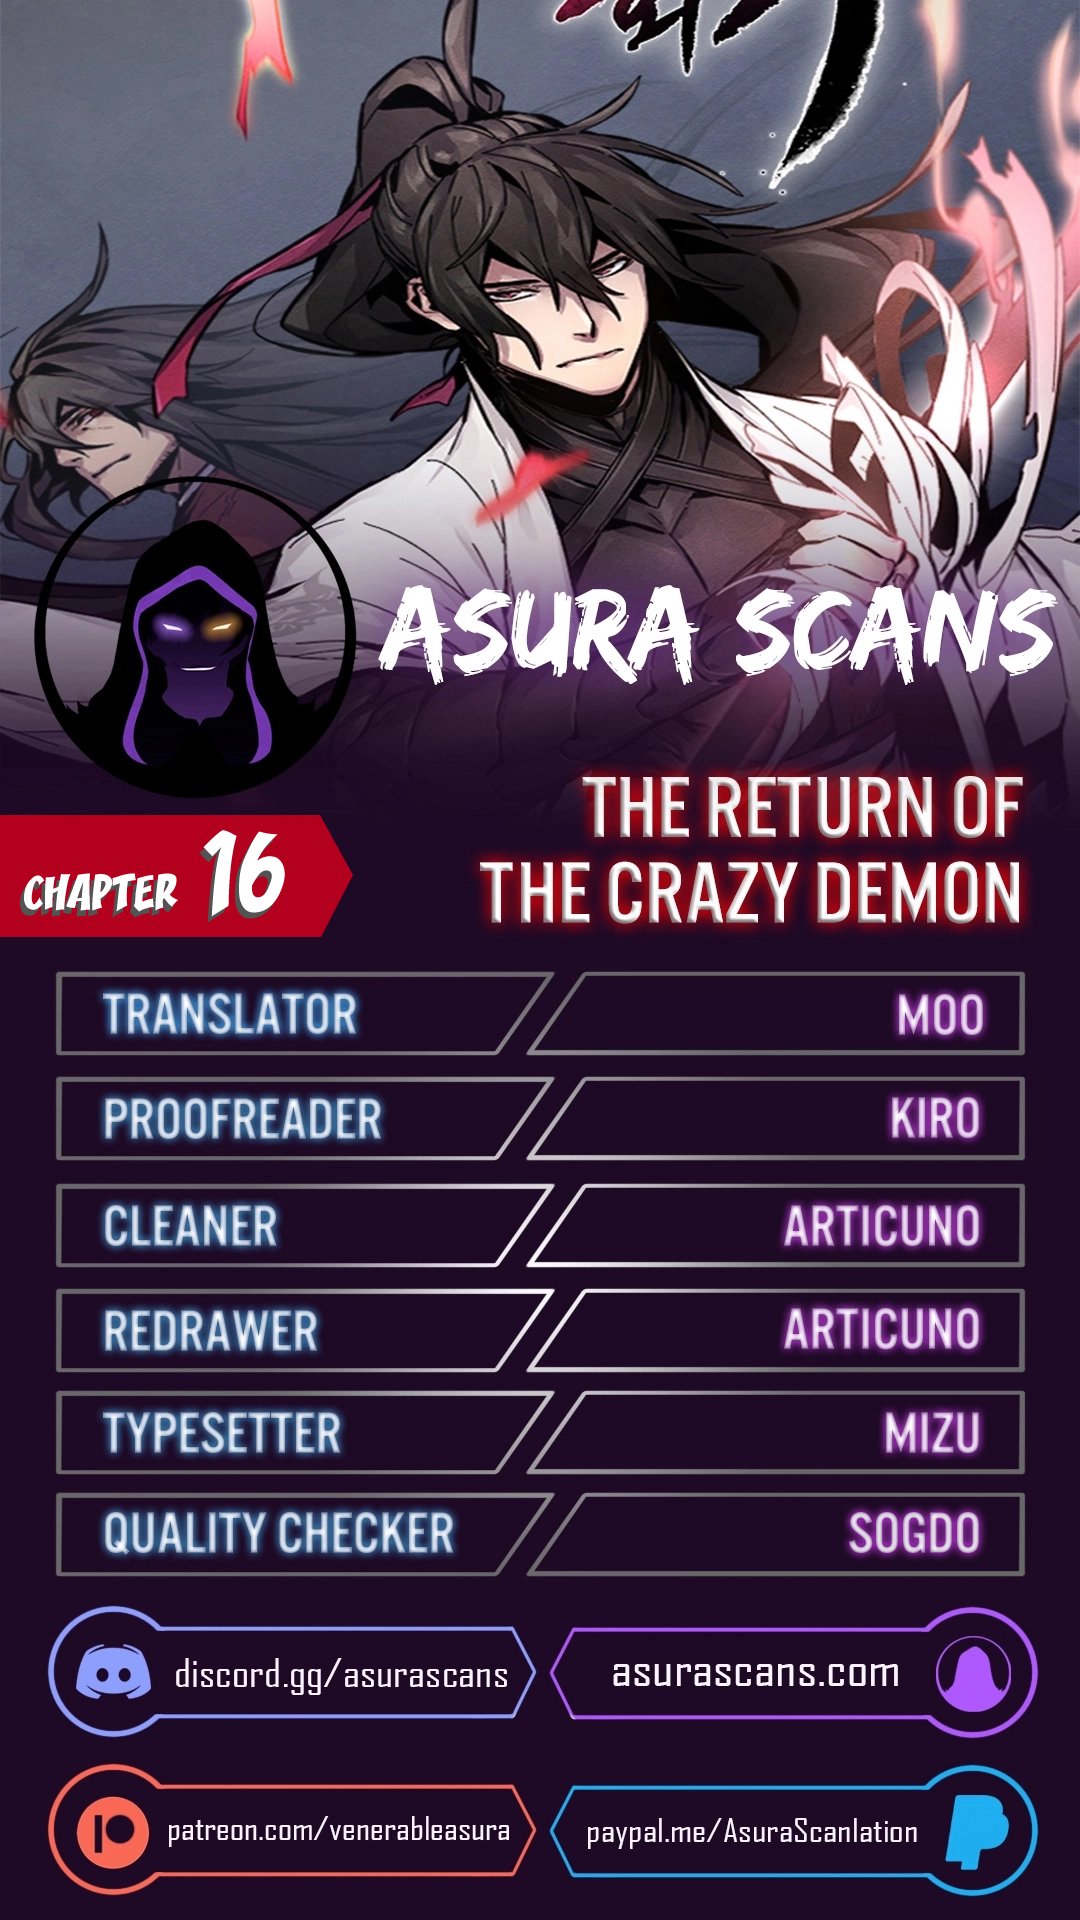 The Return of the Crazy Demon - Chapter 18557 - Image 1